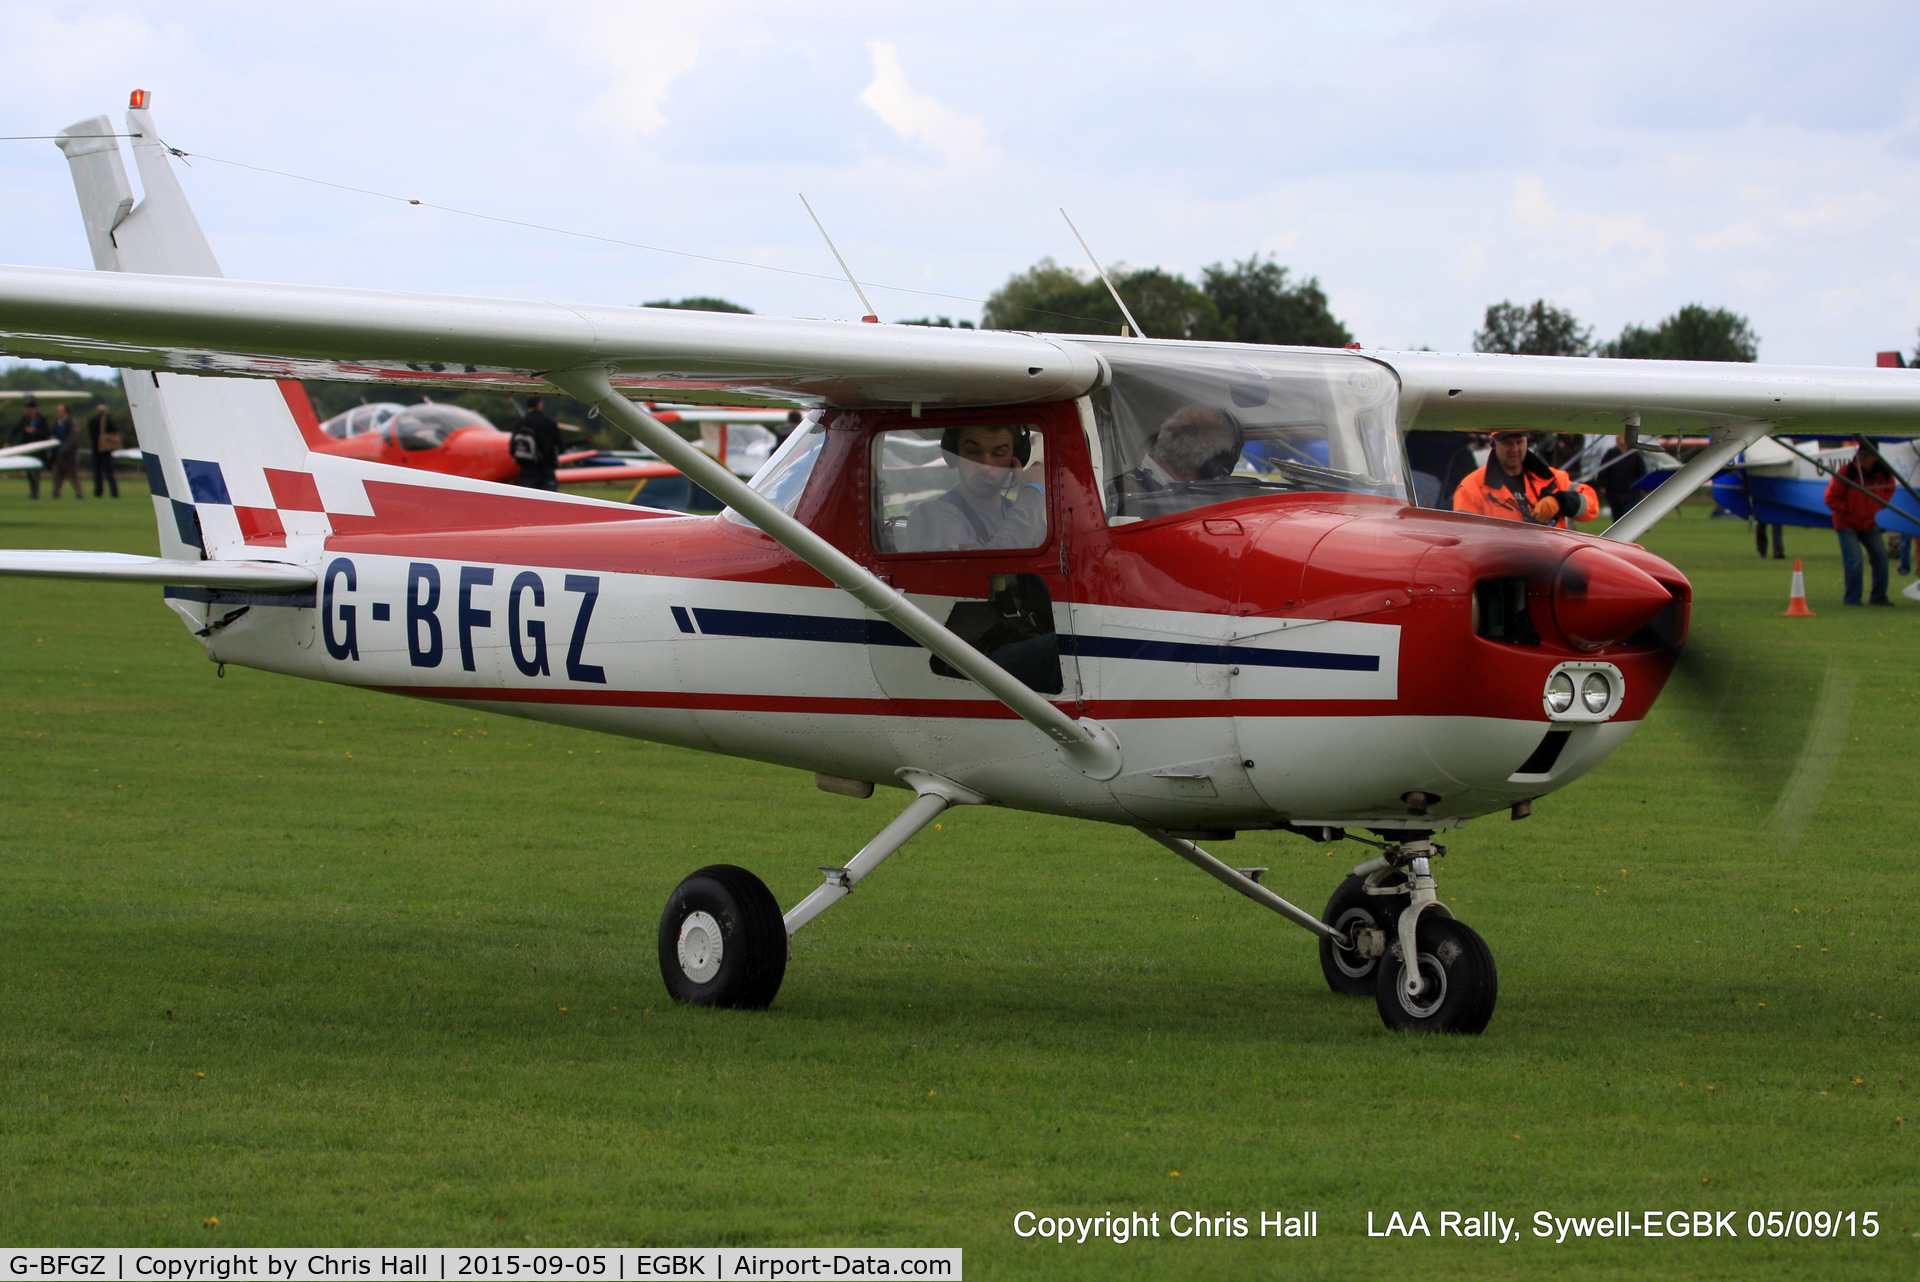 G-BFGZ, 1977 Reims FRA150M Aerobat C/N 0329, at the LAA Rally 2015, Sywell